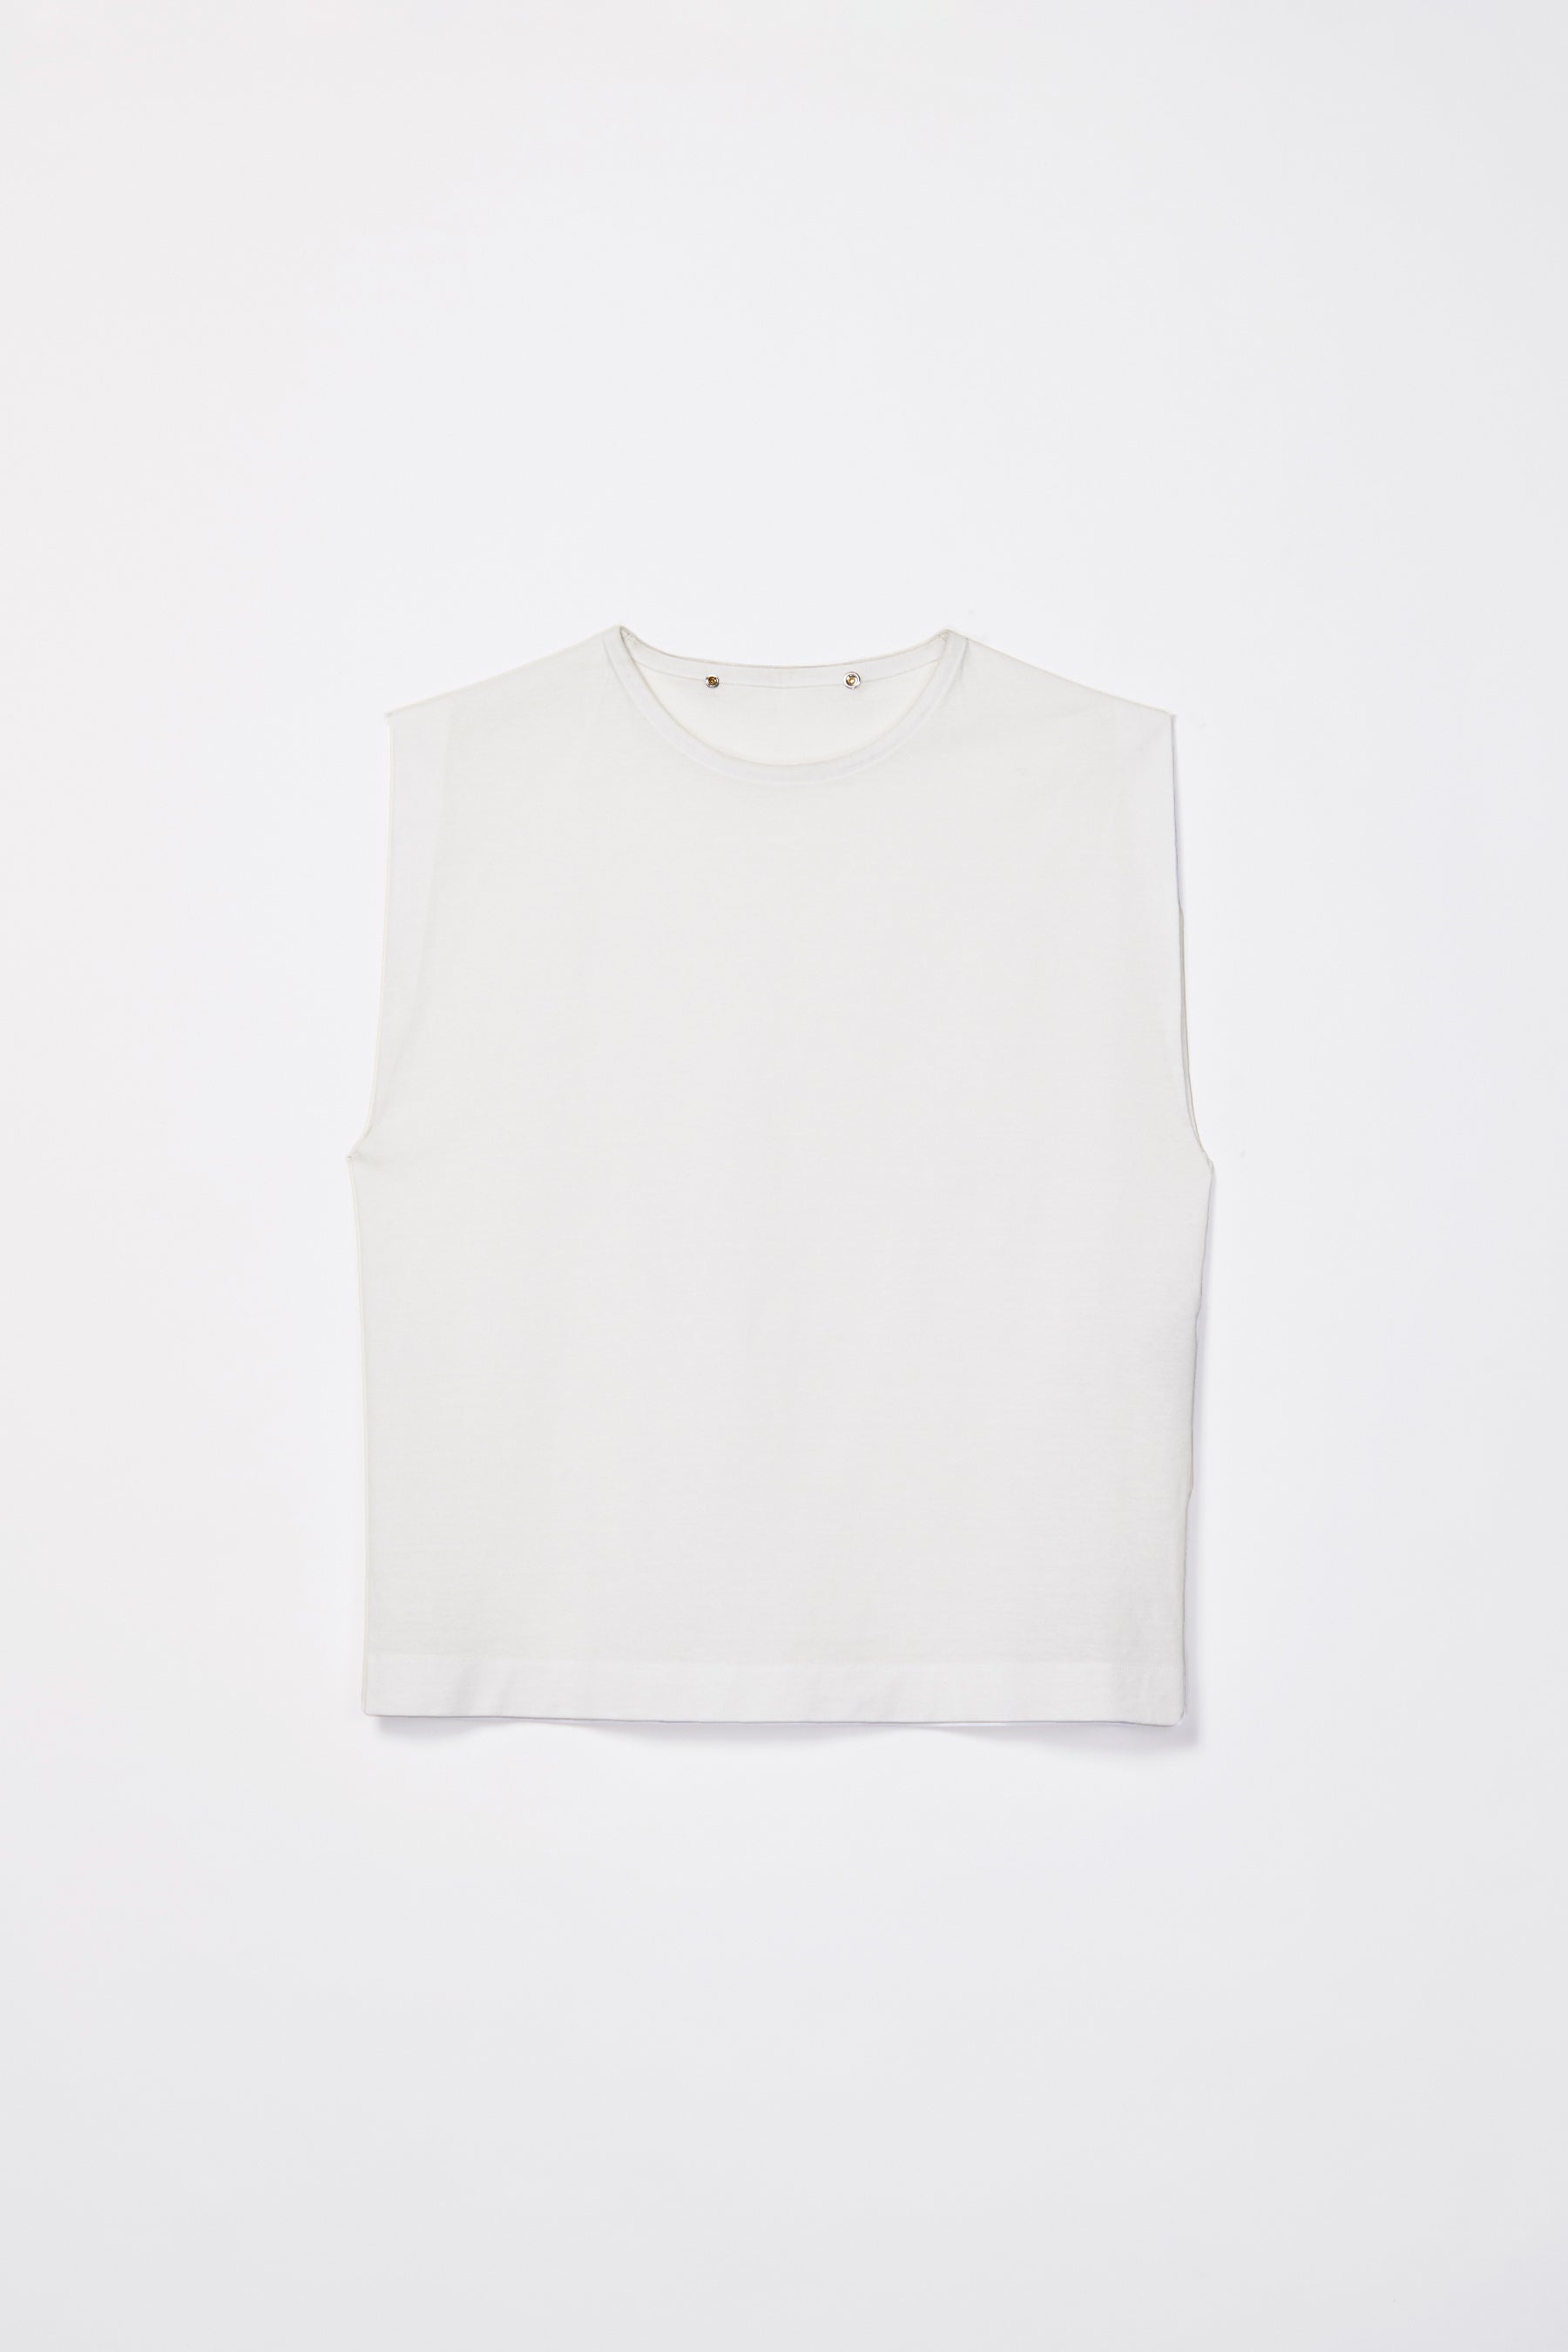 White Cotton Polyester Square Tank Tops with Adjustable Neckline